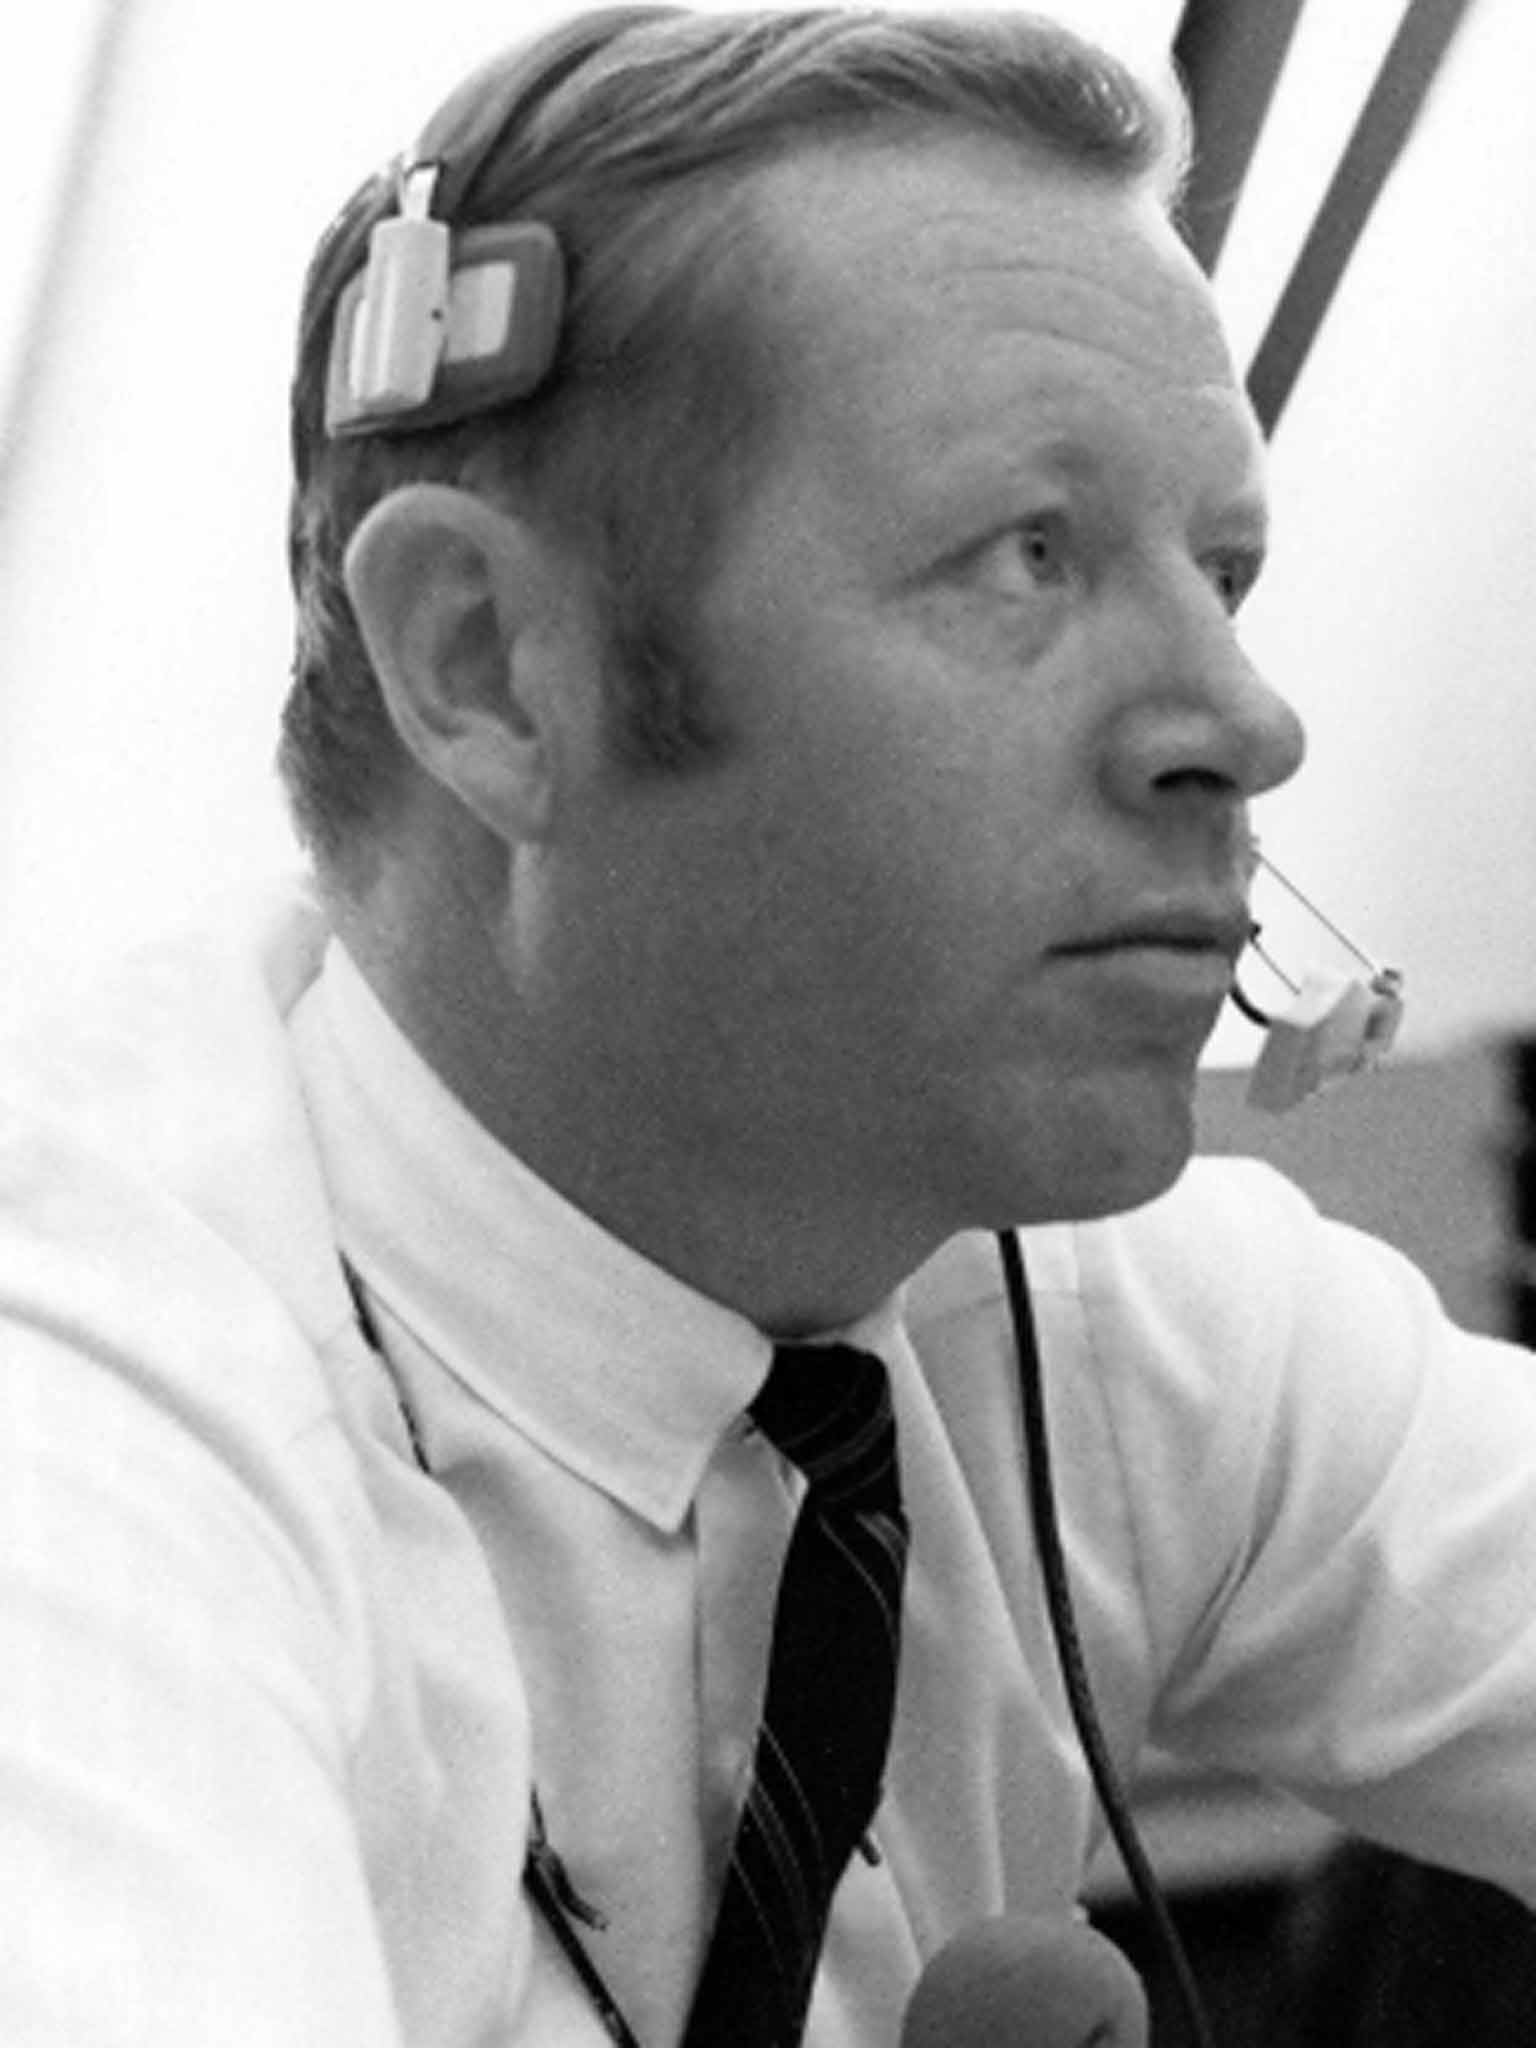 King in 1969: his later efforts resulted in the first live coverage of a Russian rocket